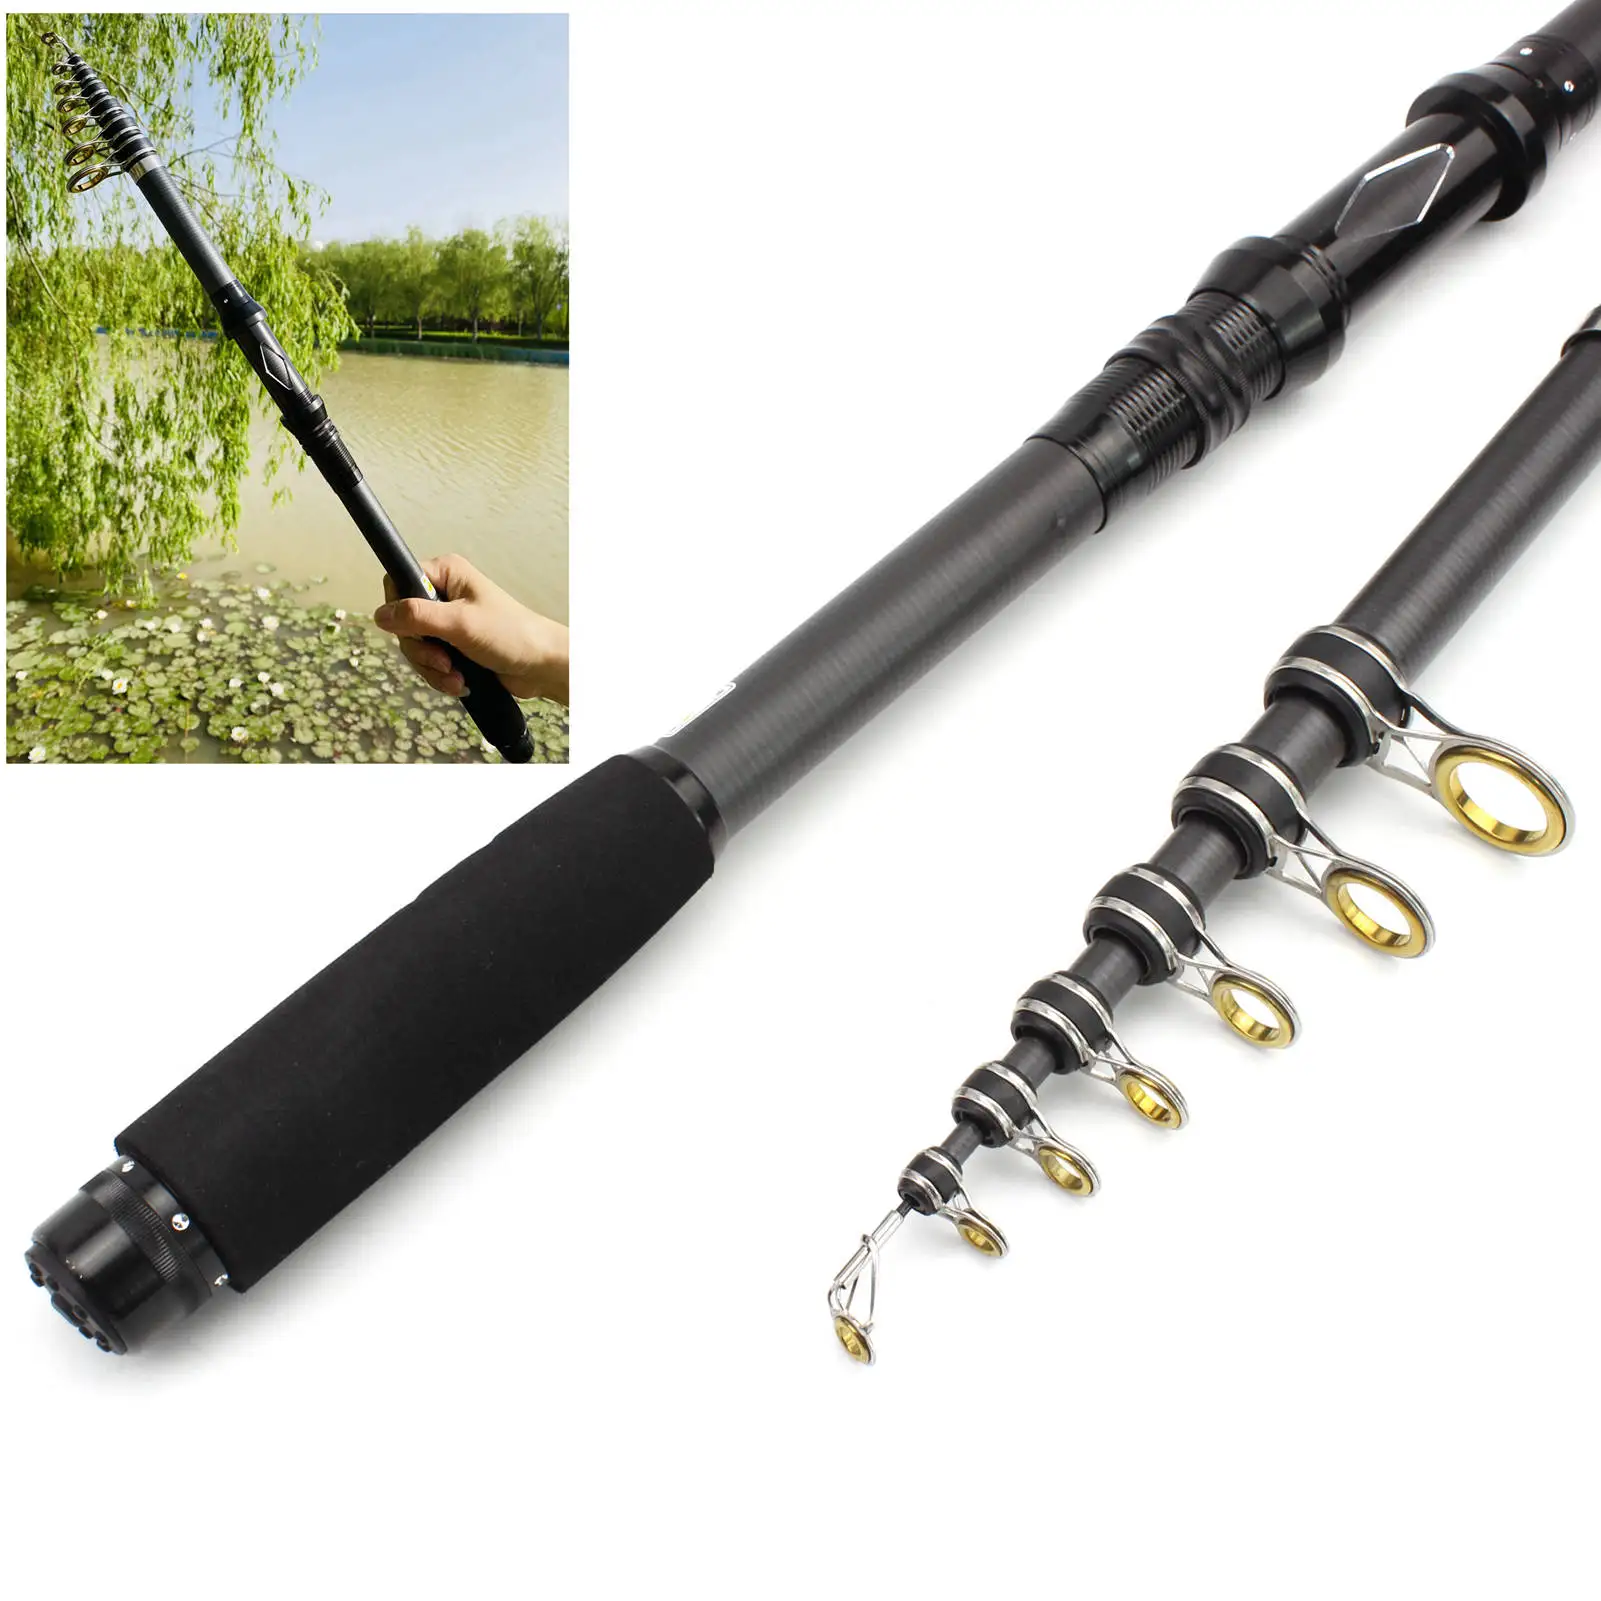 

NEW 1.8m-3.0m ultrashort Fishing Rod carbon Portable telescopic Spinning rod Ceramic large guide ring Long shot bass Trout pole